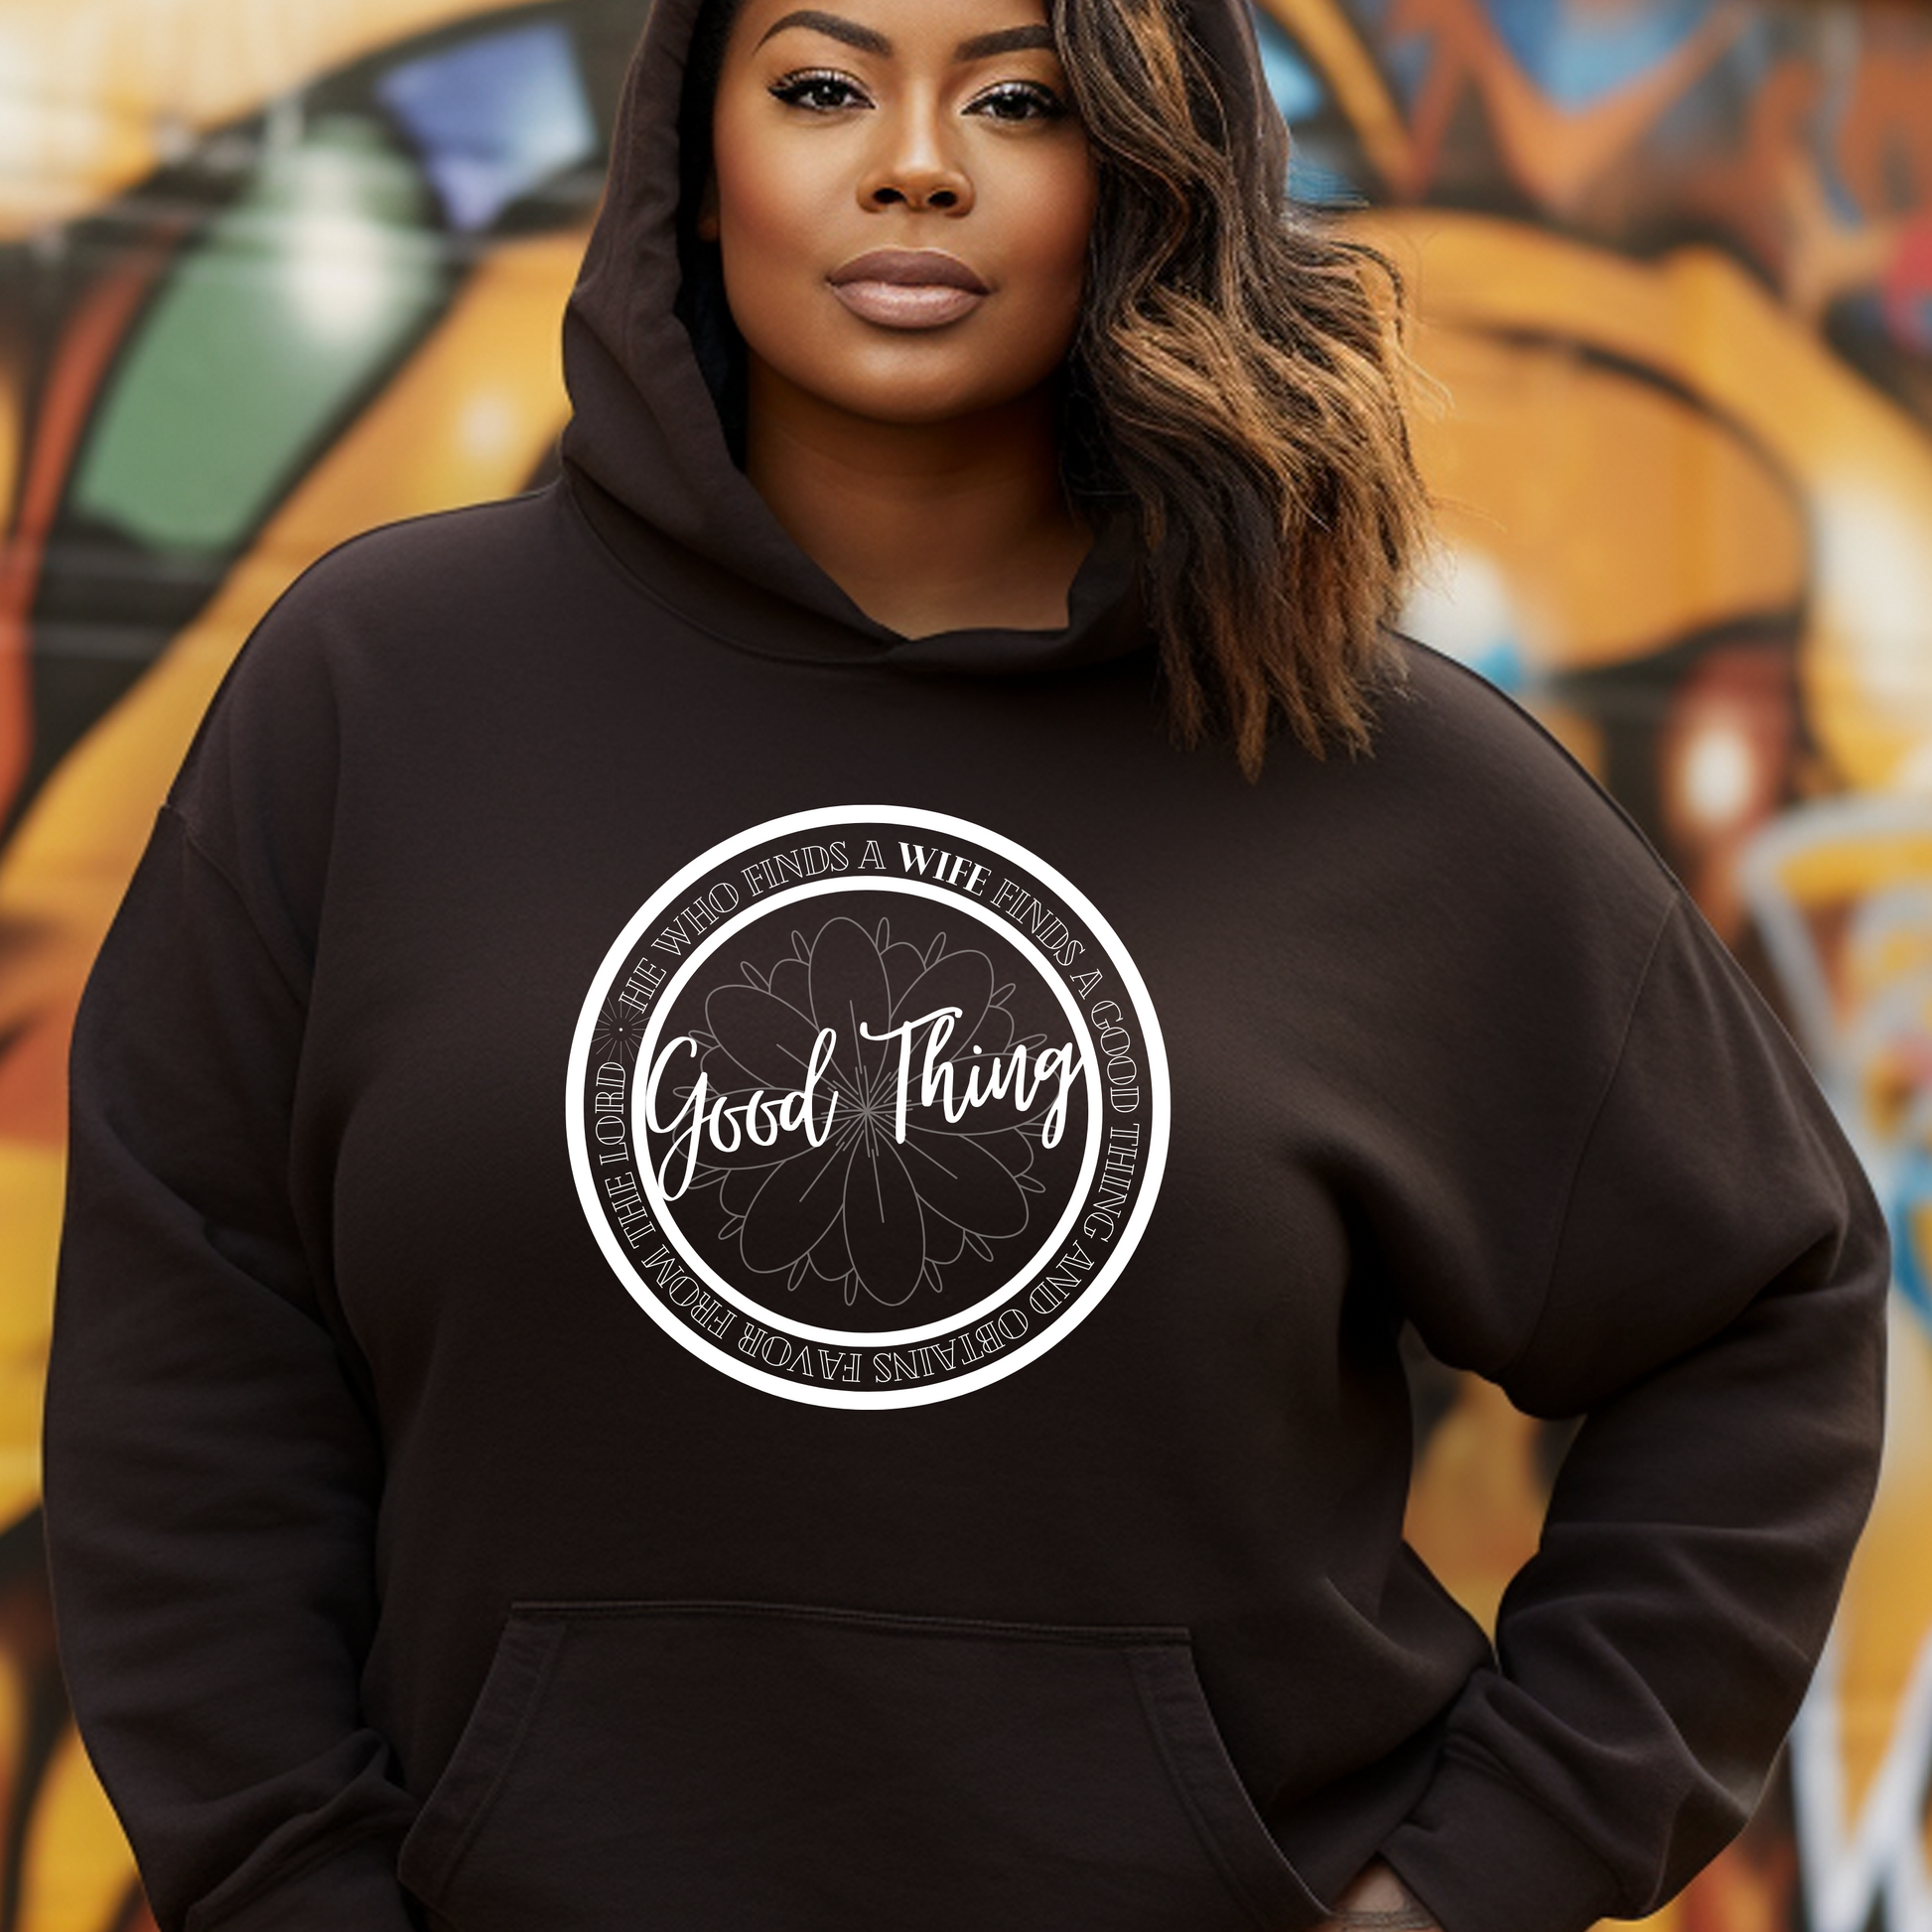 Fashionable chocolate 'Good Thing' hoodie from Triumph Tees, reflecting Proverbs 18:22. This faith-oriented apparel is a modern way to show your belief and God's favor.